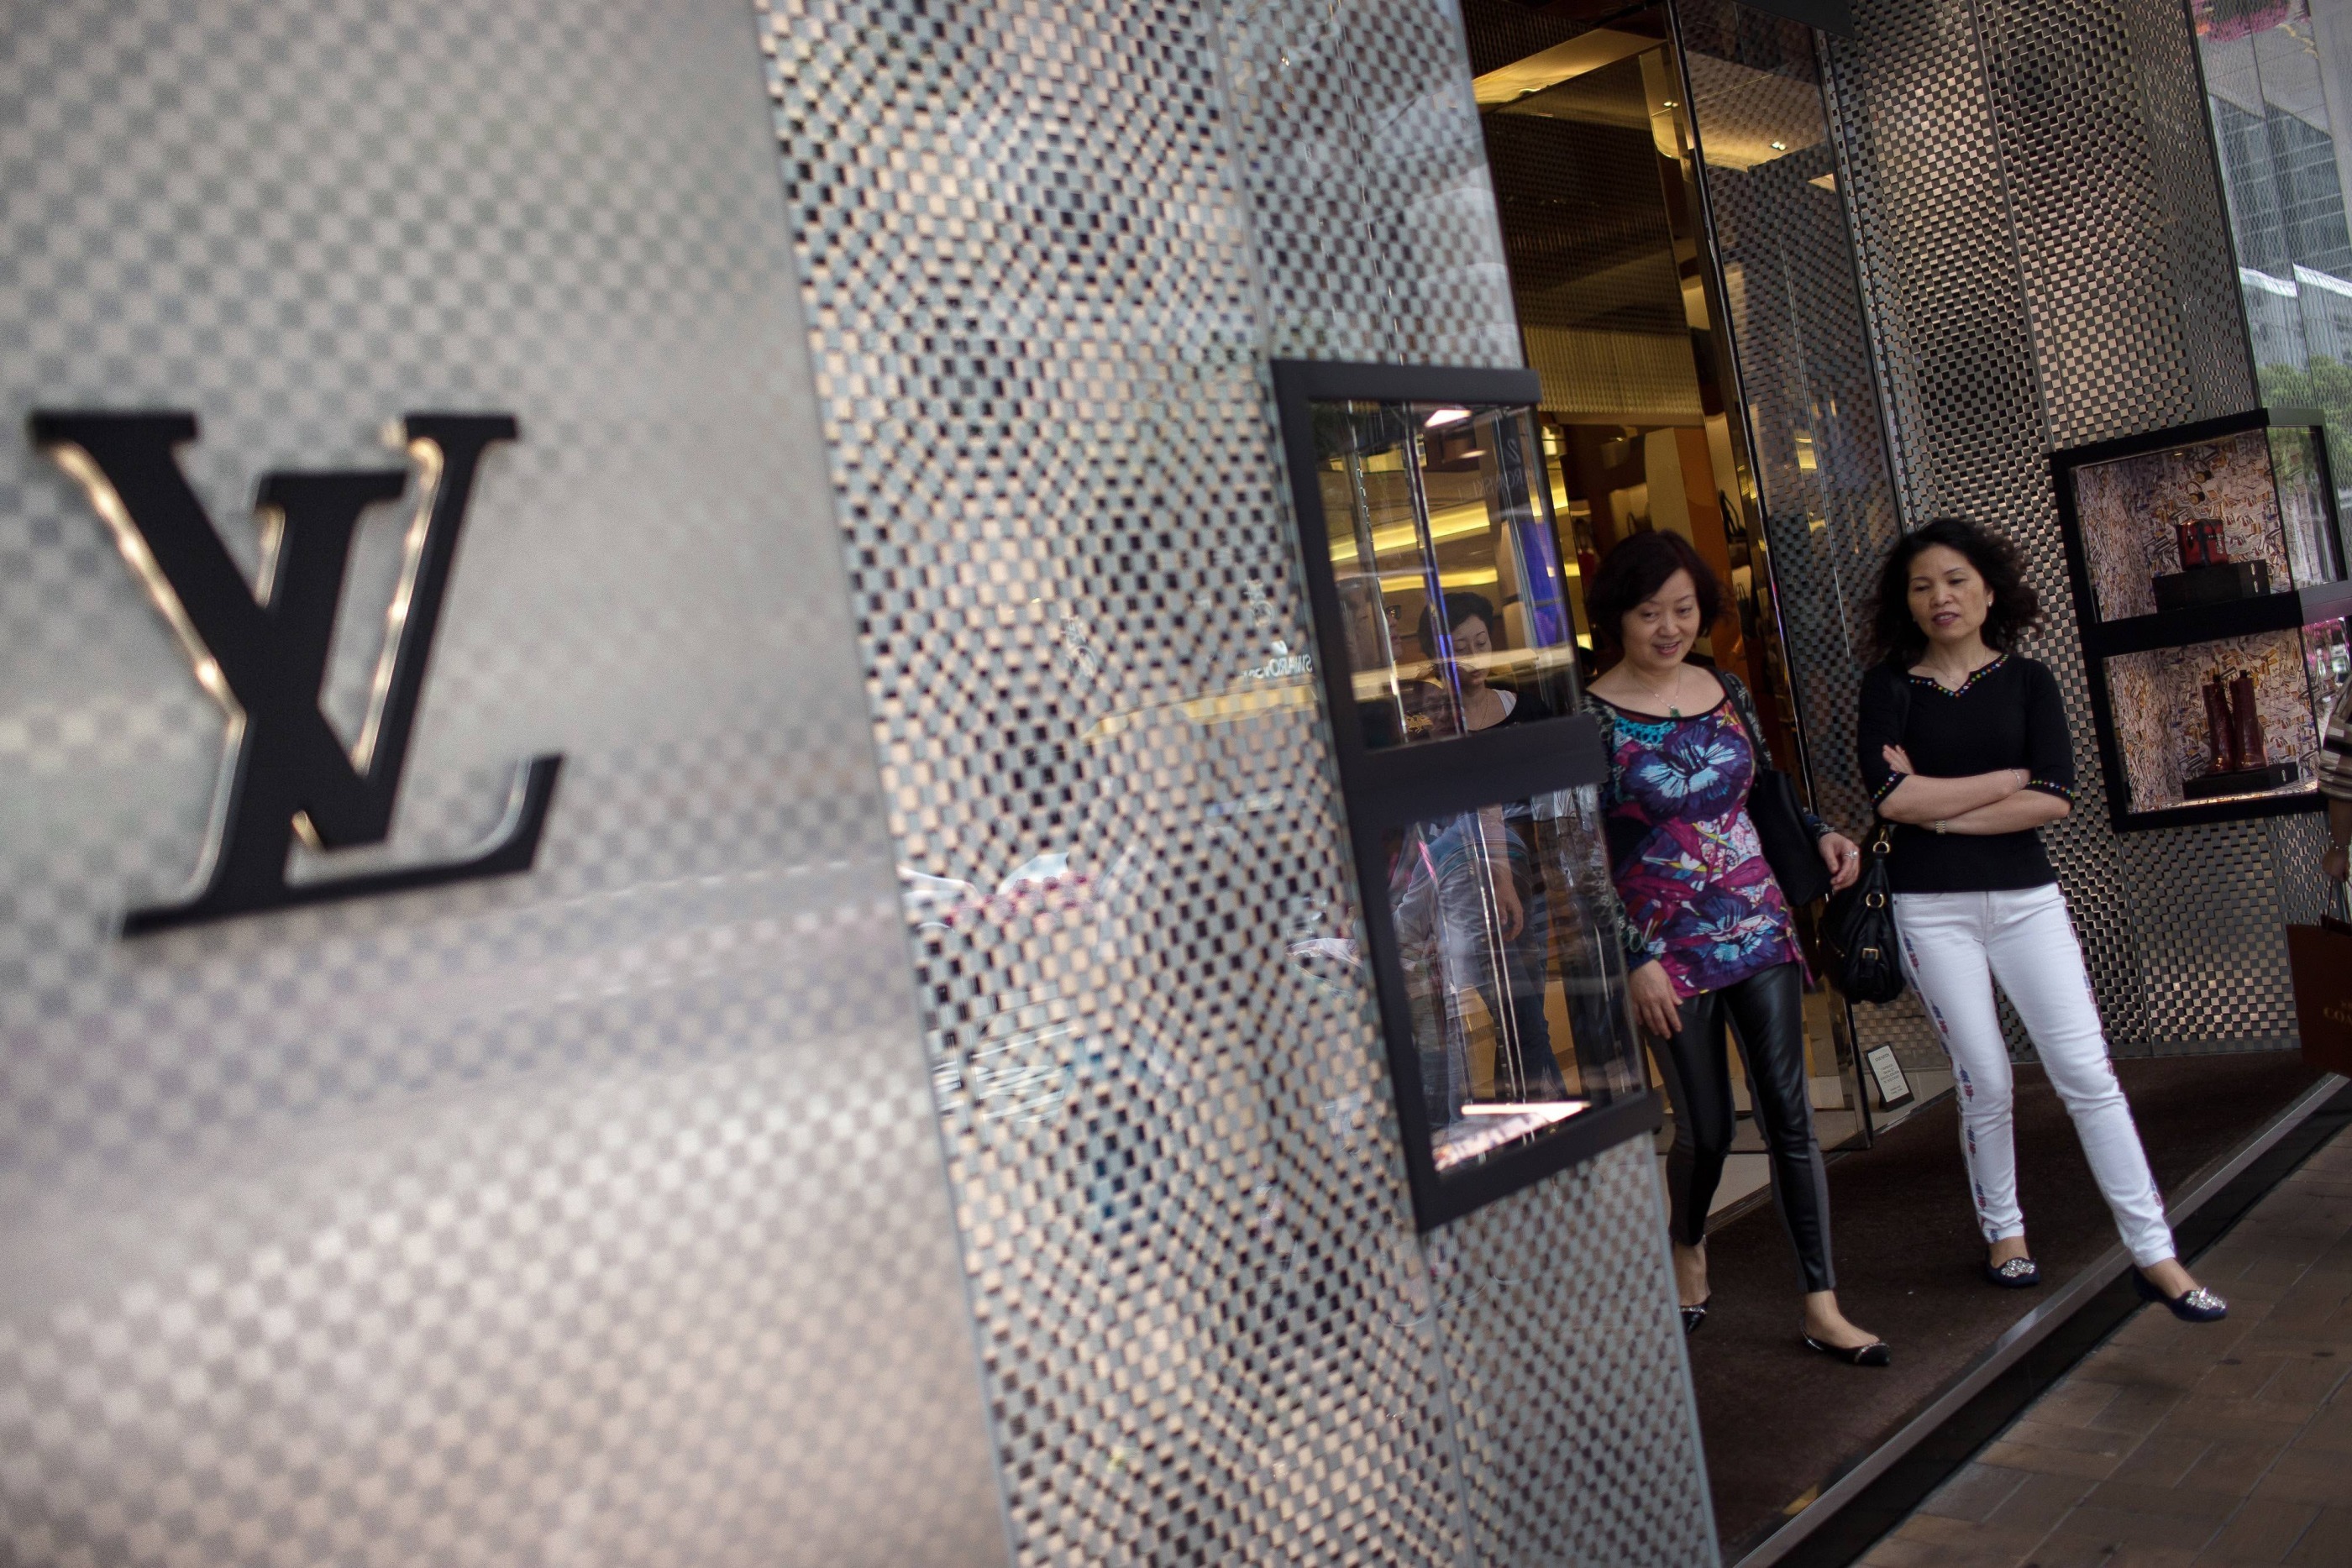 Louis Vuitton targets middle-income shoppers with perfume launch